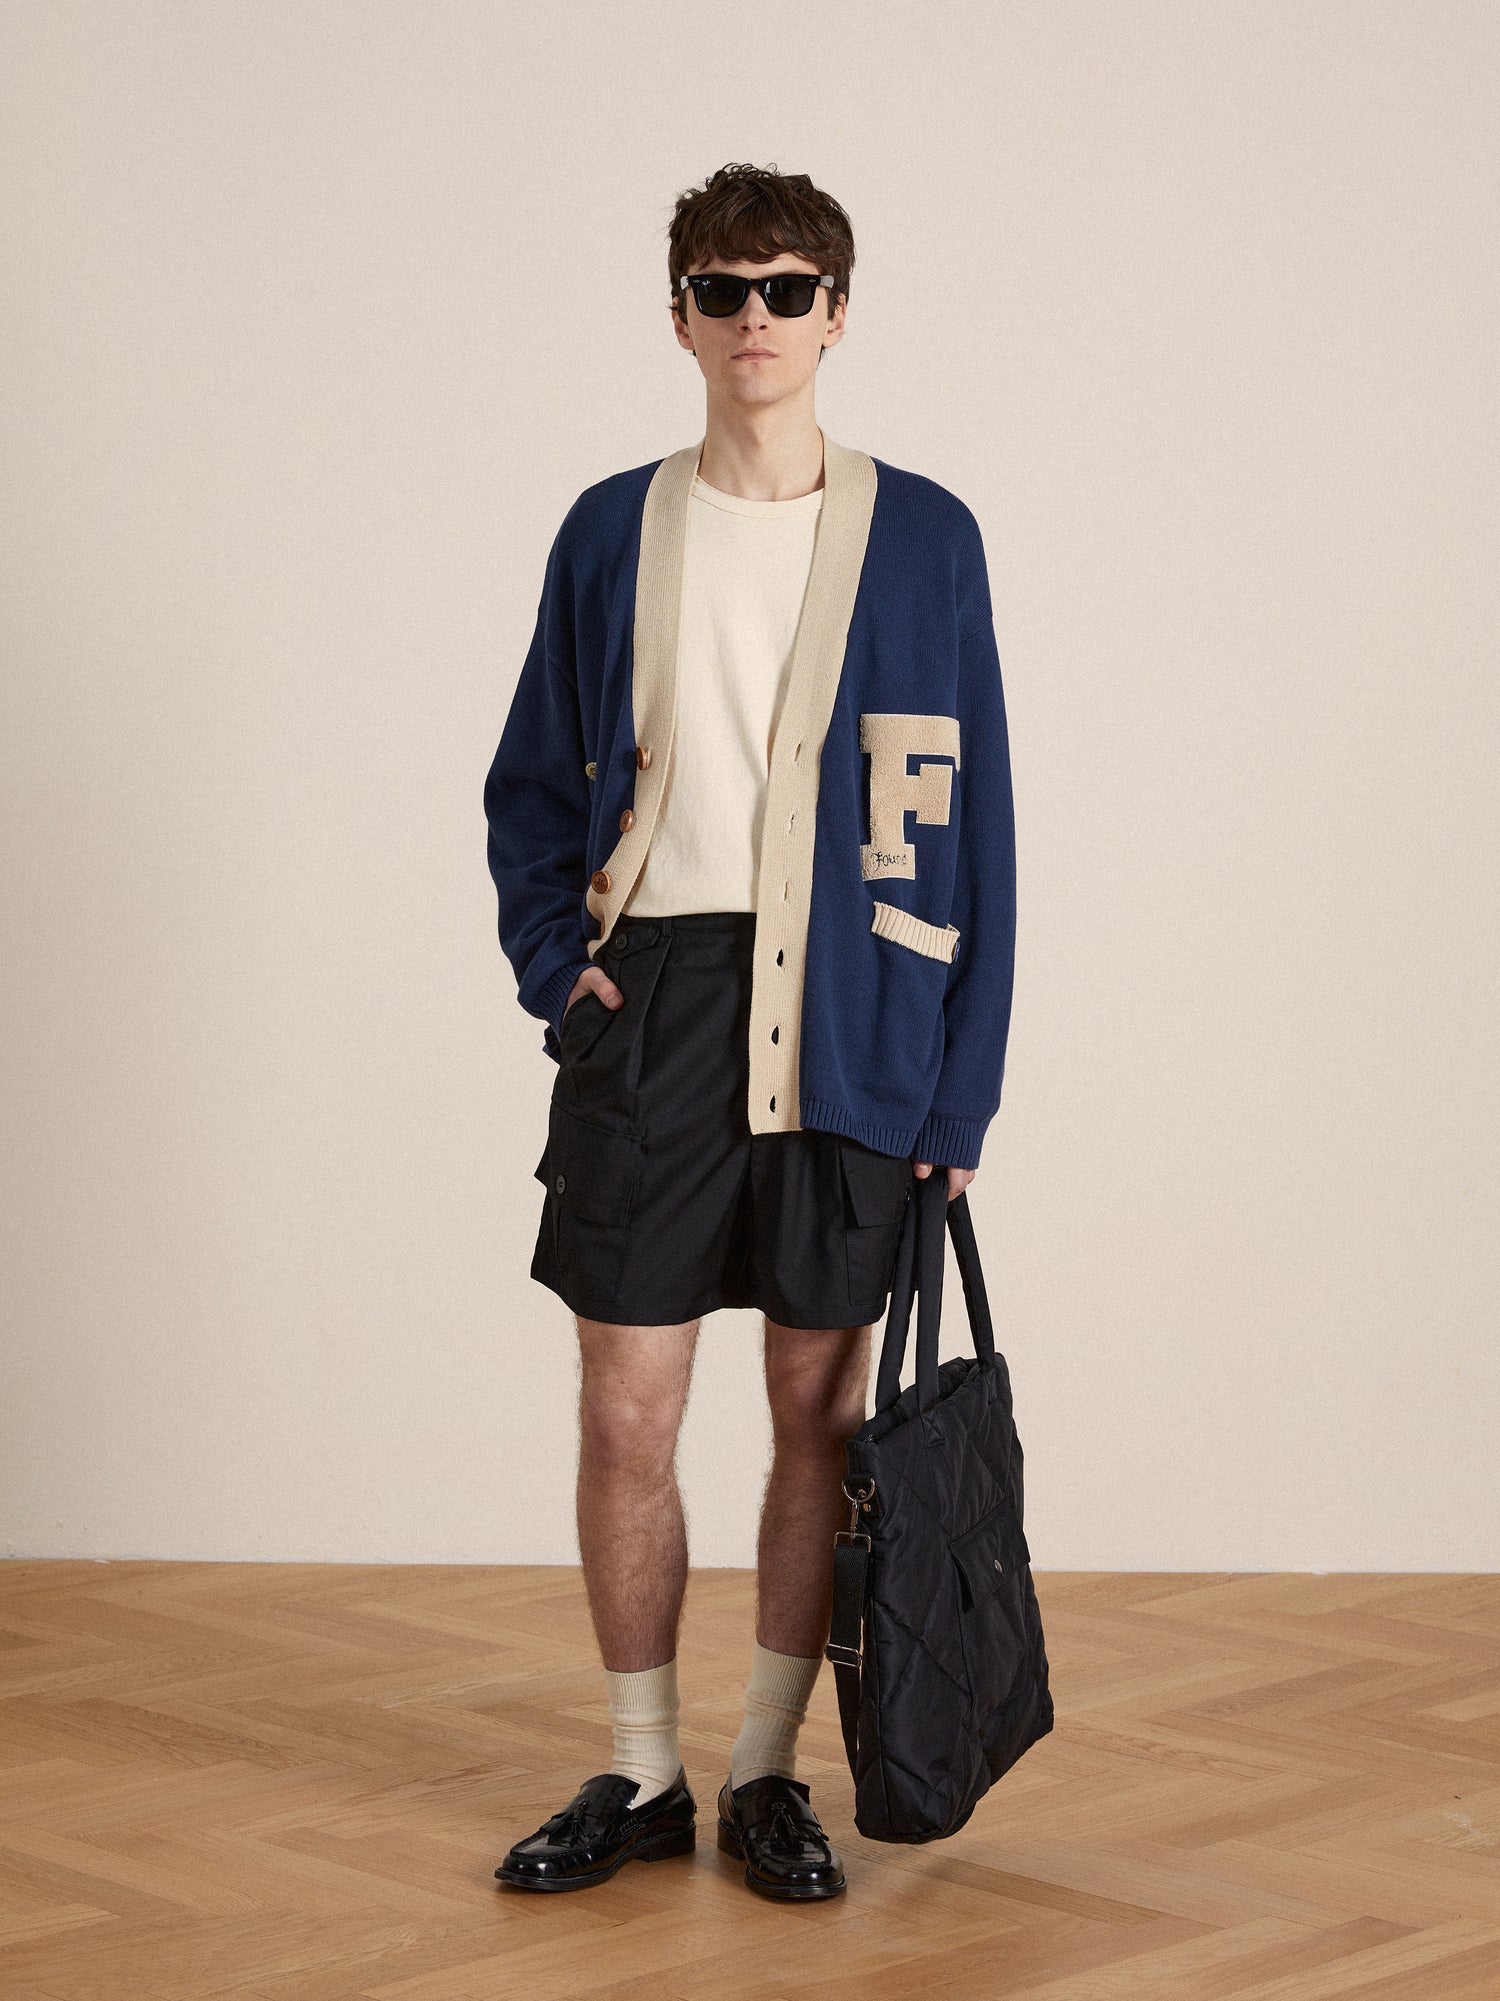 A man in a Found Varsity Contrast Cardigan and shorts holding a bag.